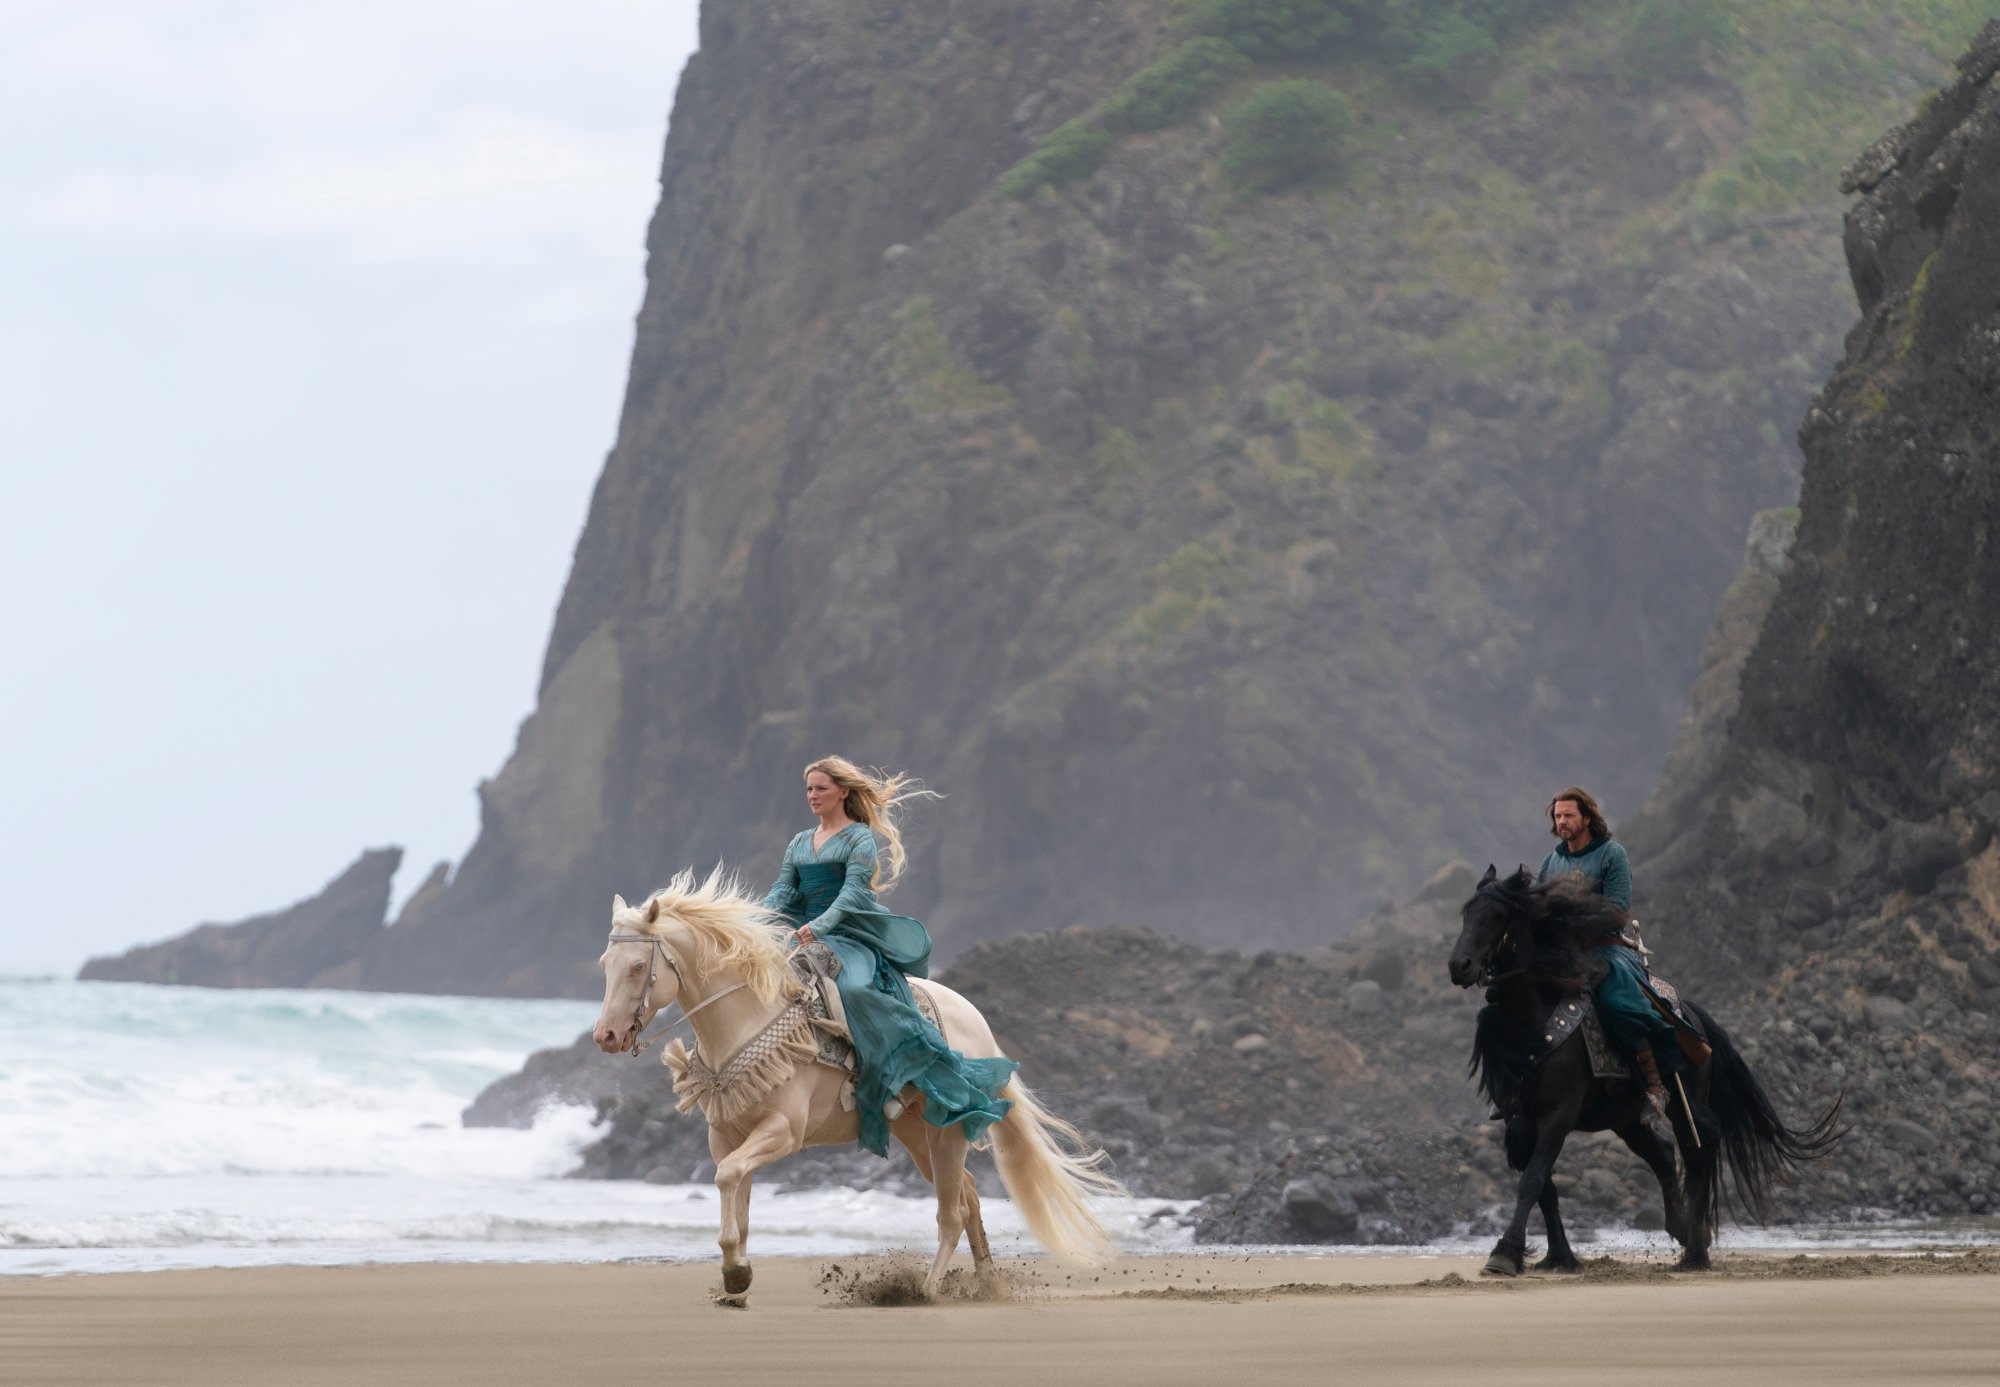 Morfydd Clark and Lloyd Owen as Elendil in 'The Lord of the Rings: The RIngs of Power,' which releases episode 3 on Sept. 9. They're riding horses in front of a cliff and the shore.